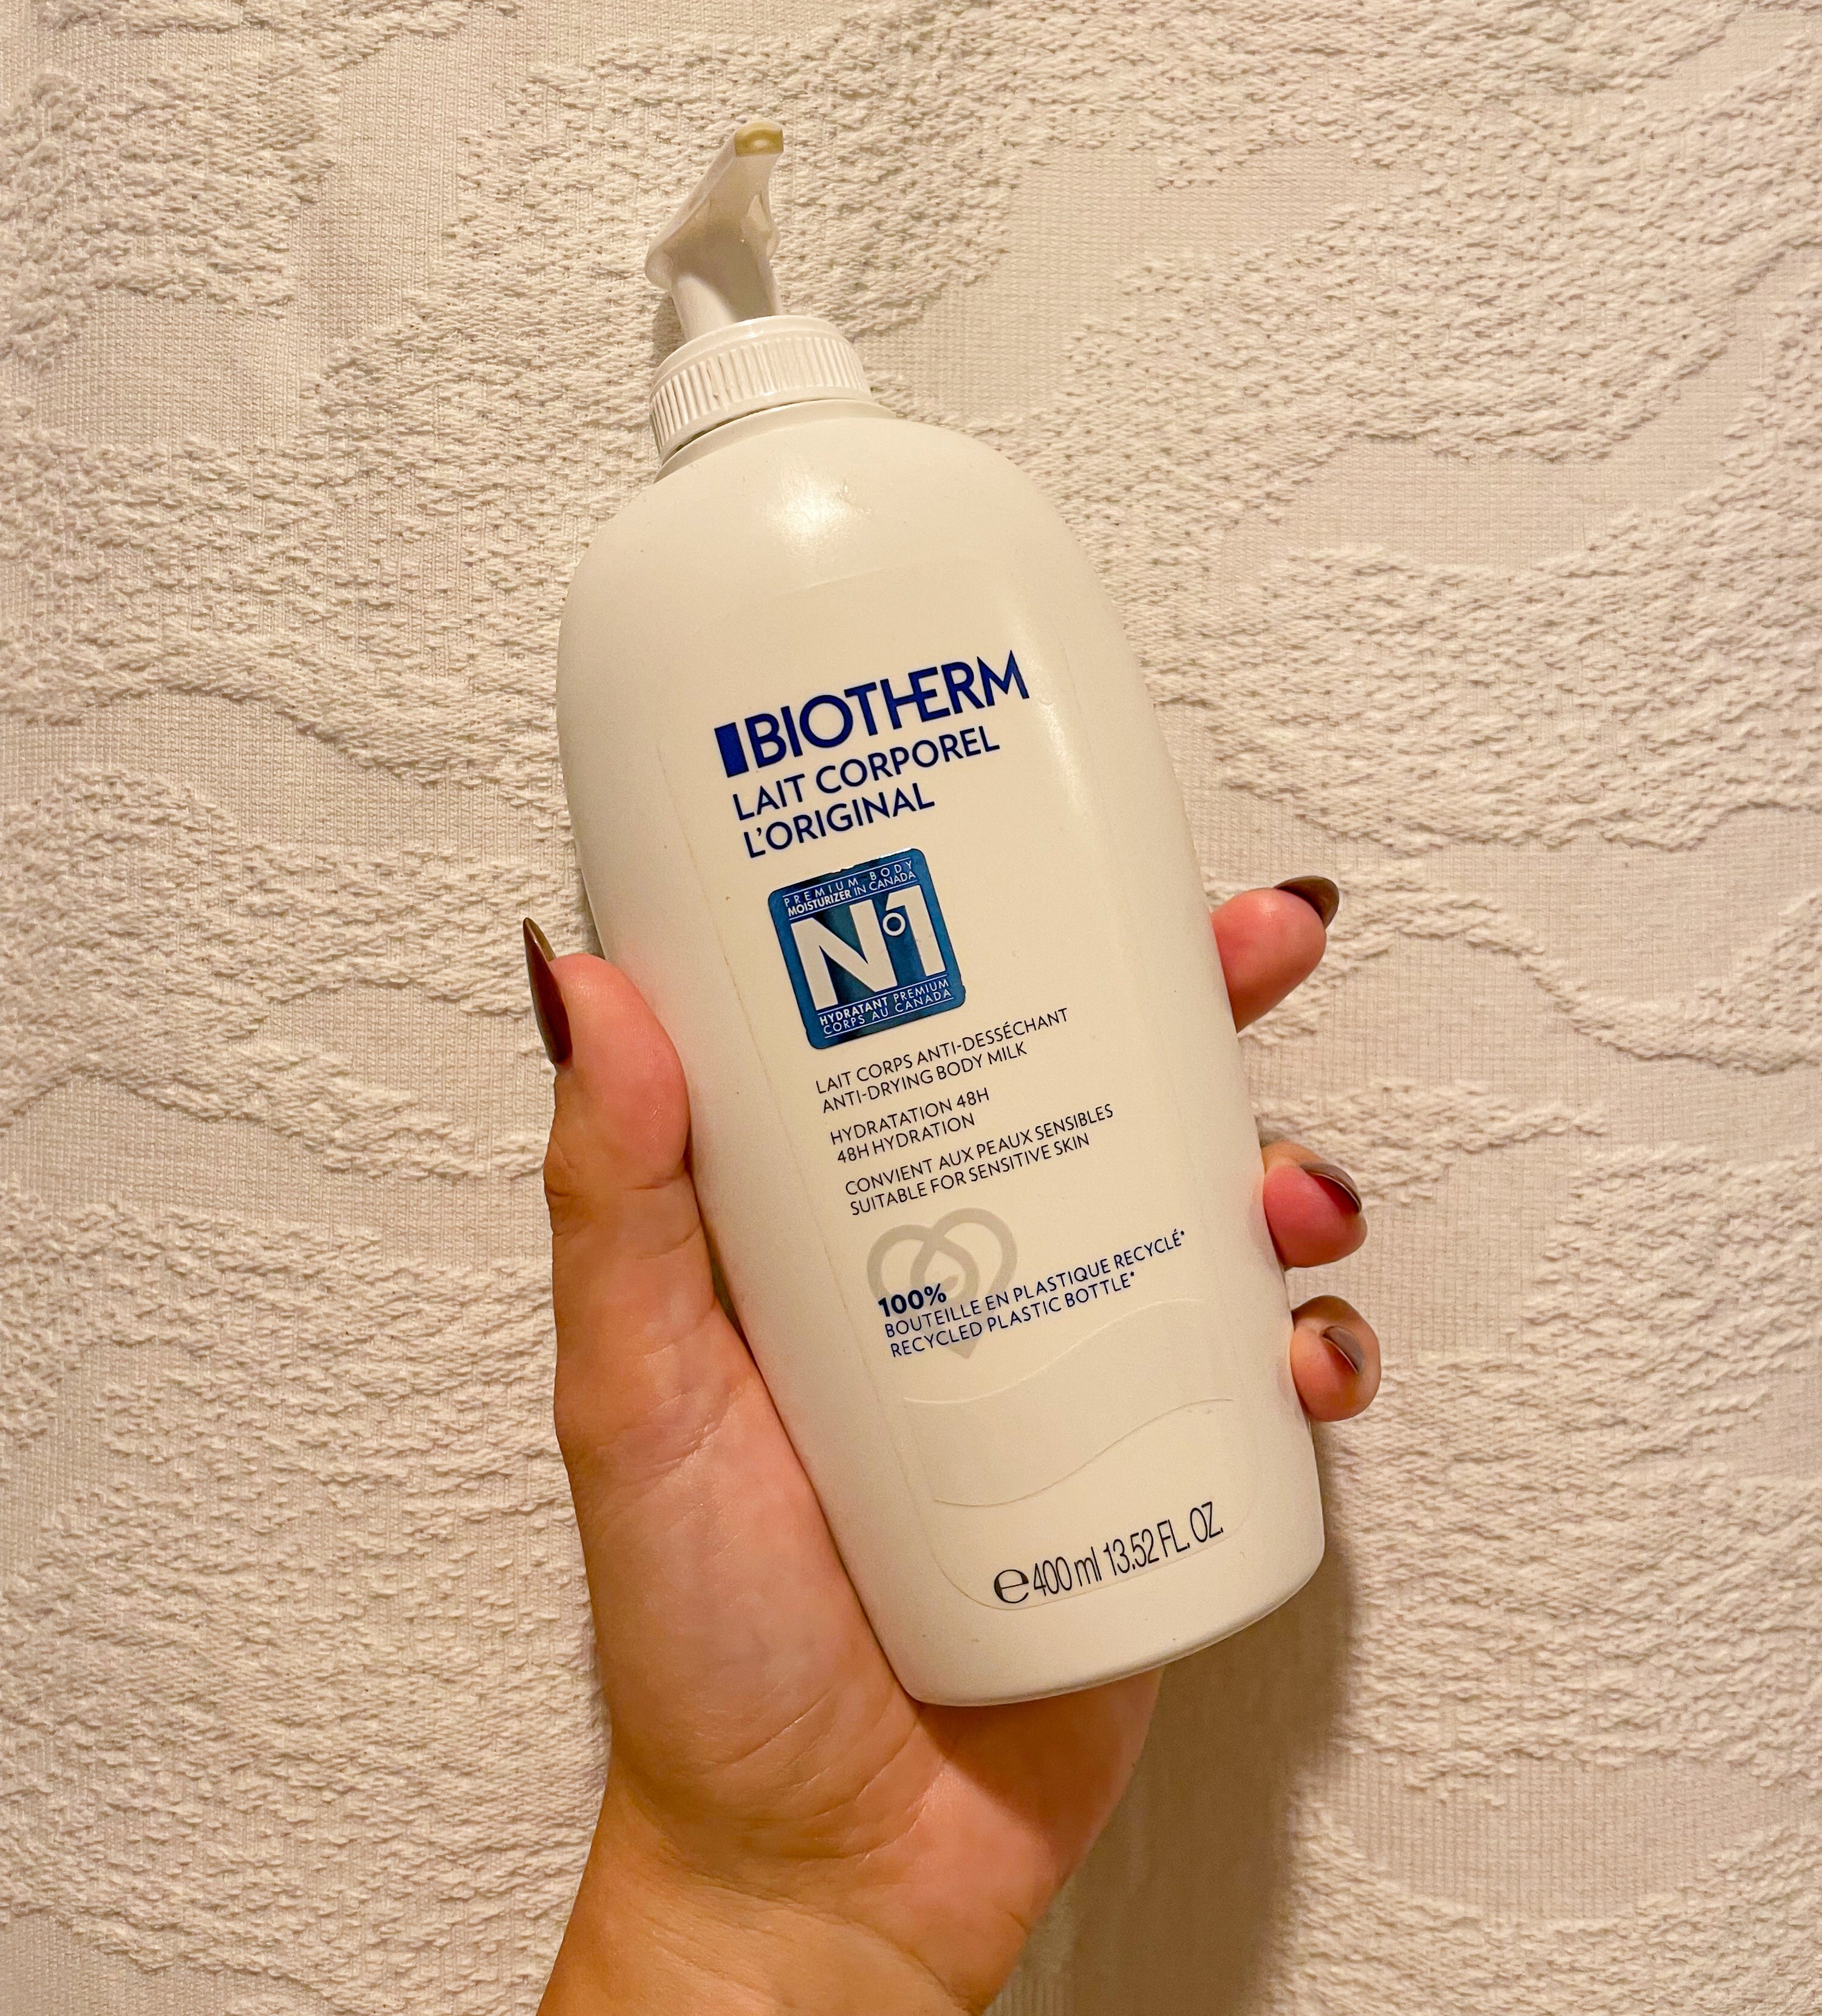 Victoria holding up a bottle of the biotherm lotion